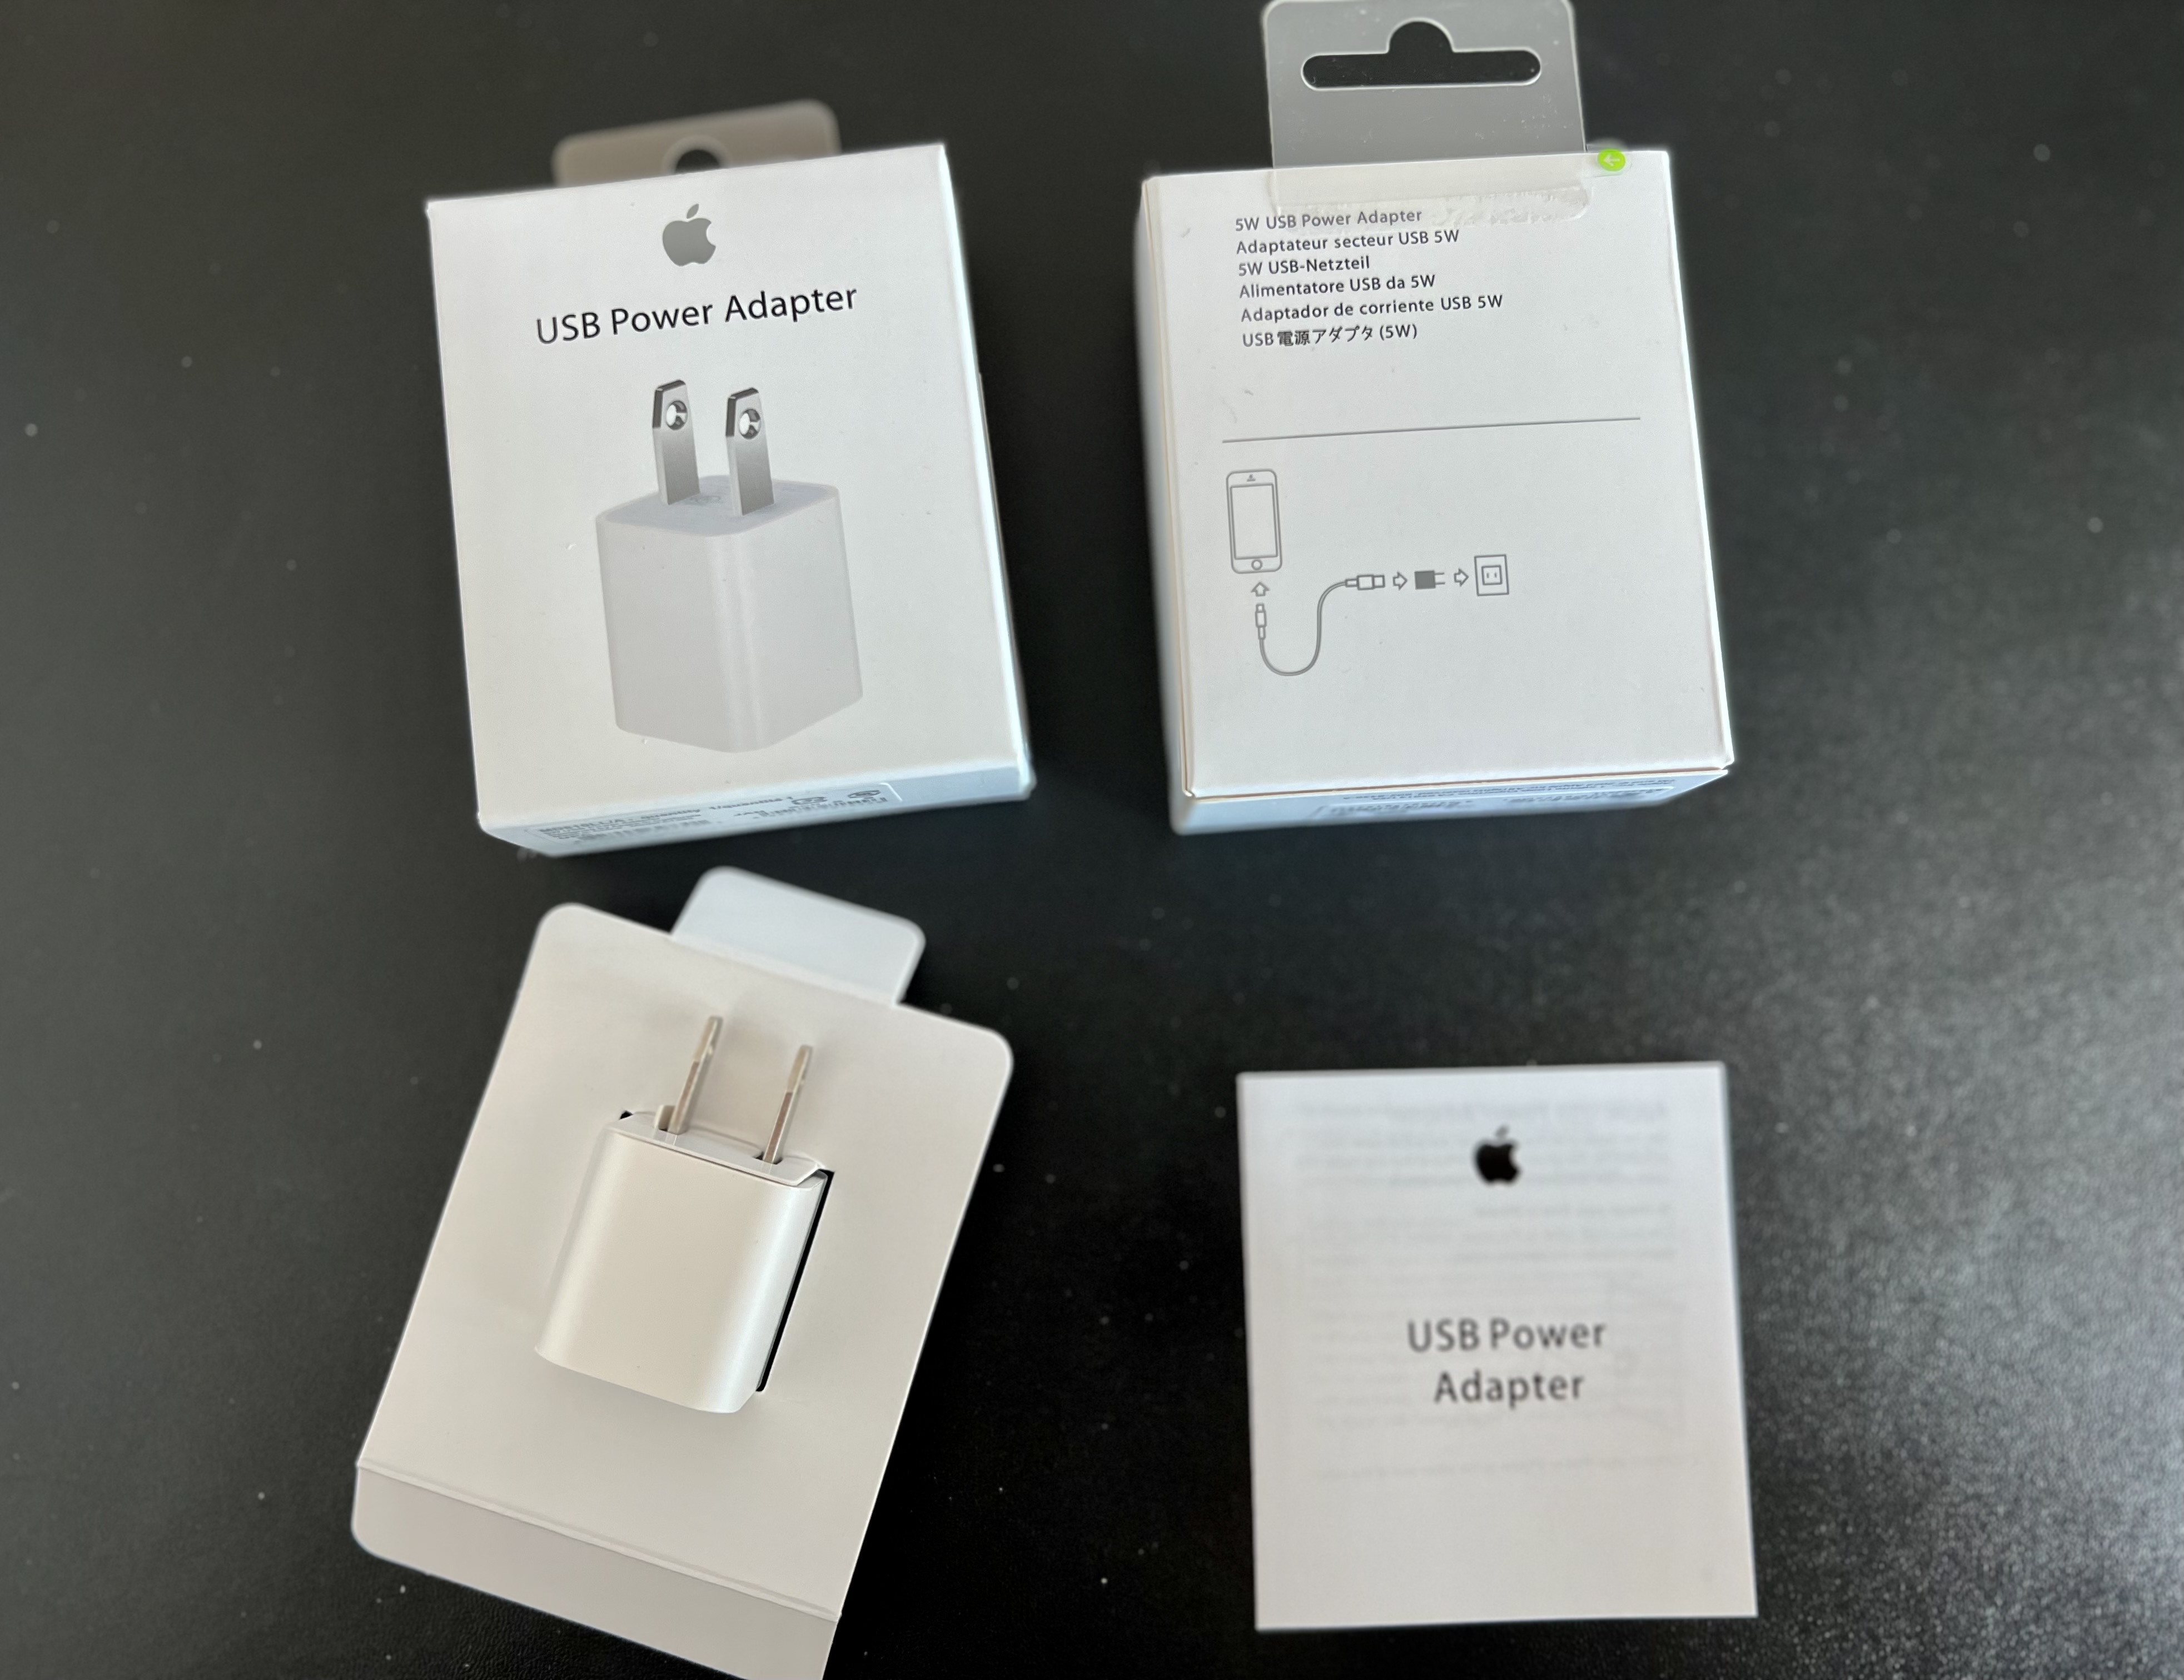 

UPS DHL FEDEX Free 100Pcs/lot OEM Quality 5V 1A US EU AC USB Wall Charger Travel Adapter For iPhone XS XR 7 Plus 6 6S 5S For iPhone charger